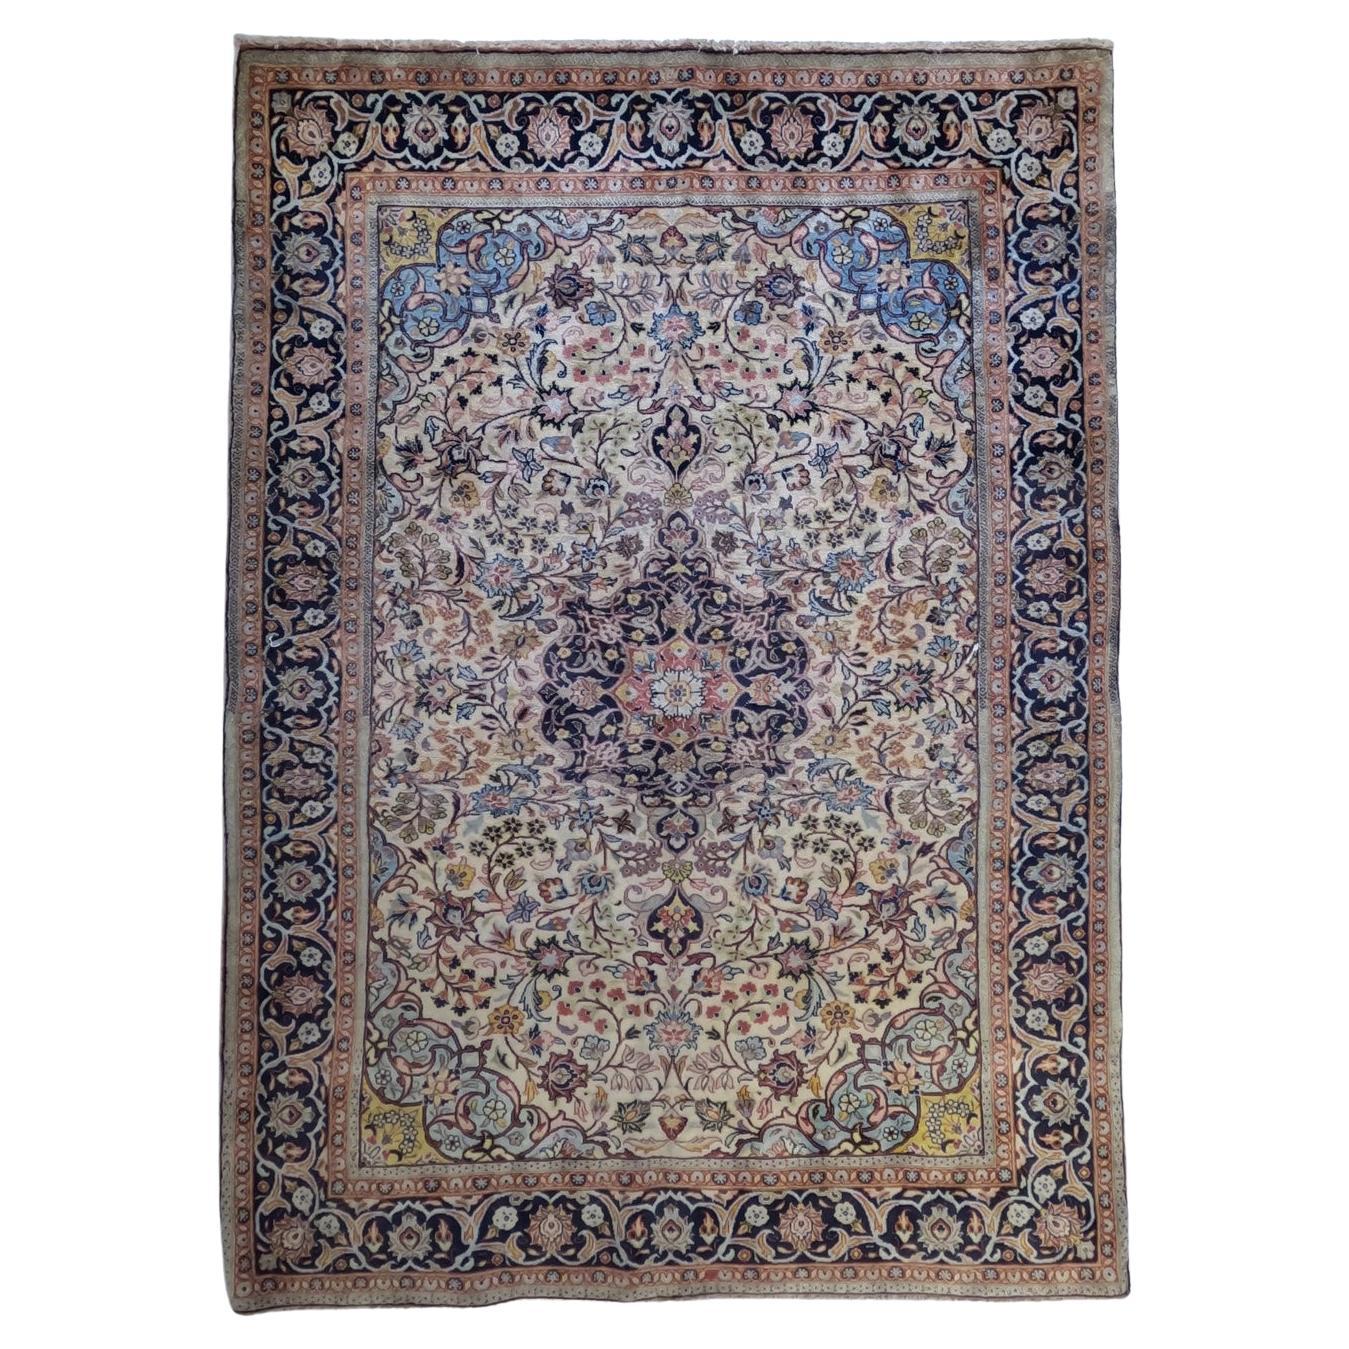 Early 20th century Vintage, semi antique Isfahan, Lambs wool soft colors -pastel For Sale